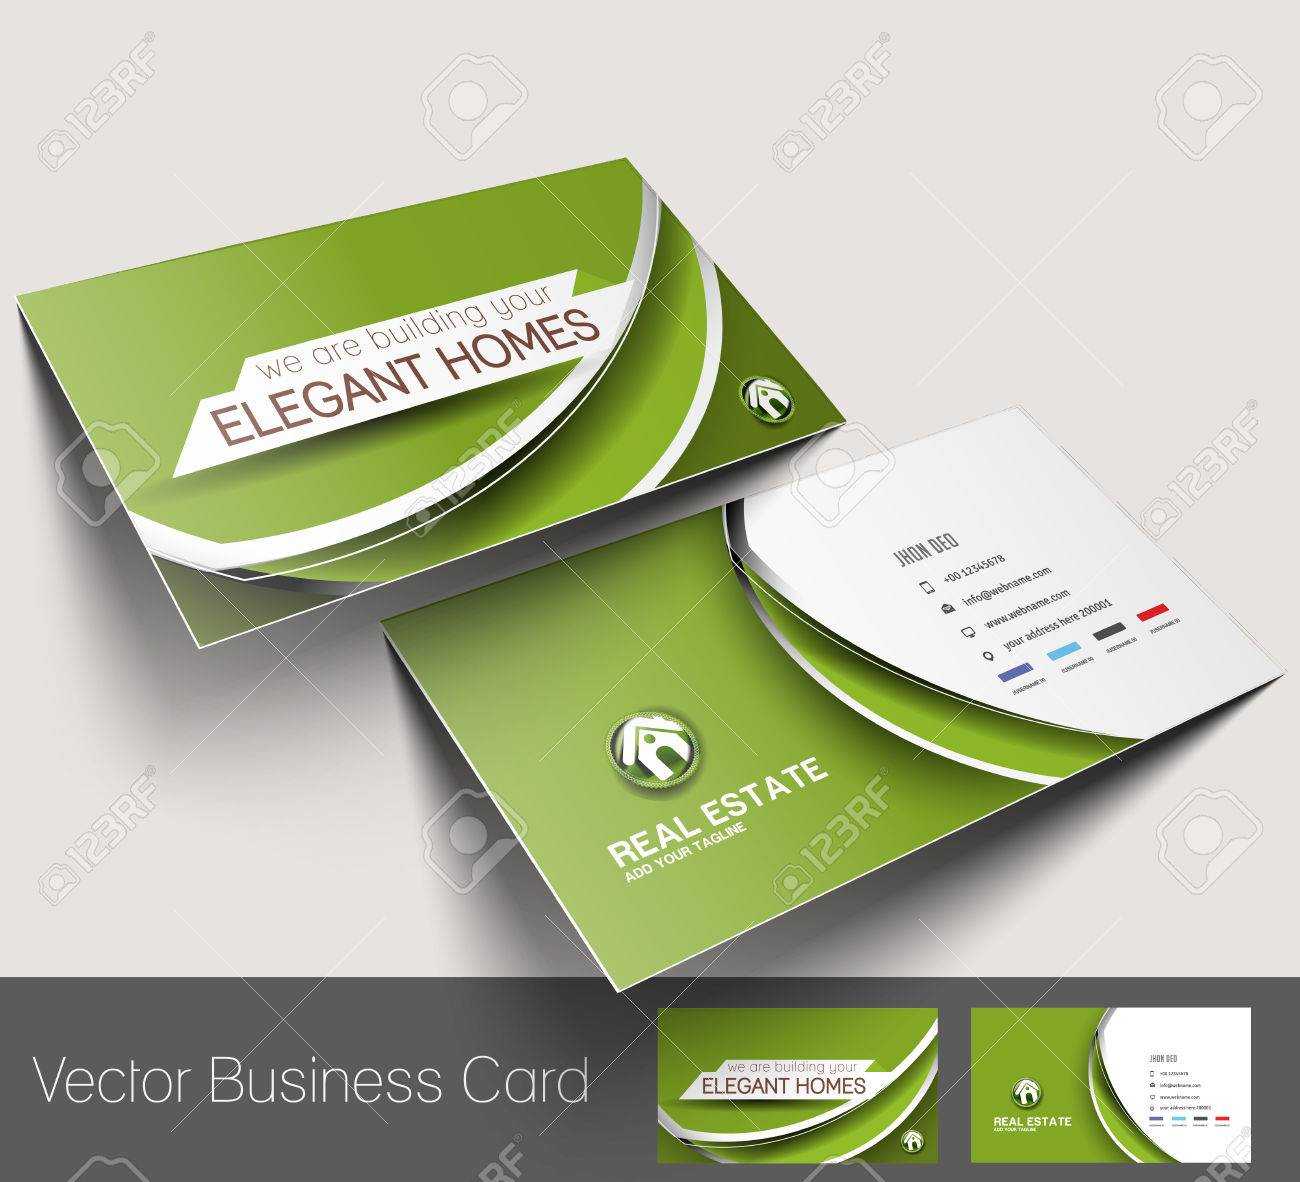 Real Estate Agent Business Card Set Template Regarding Real Estate Agent Business Card Template